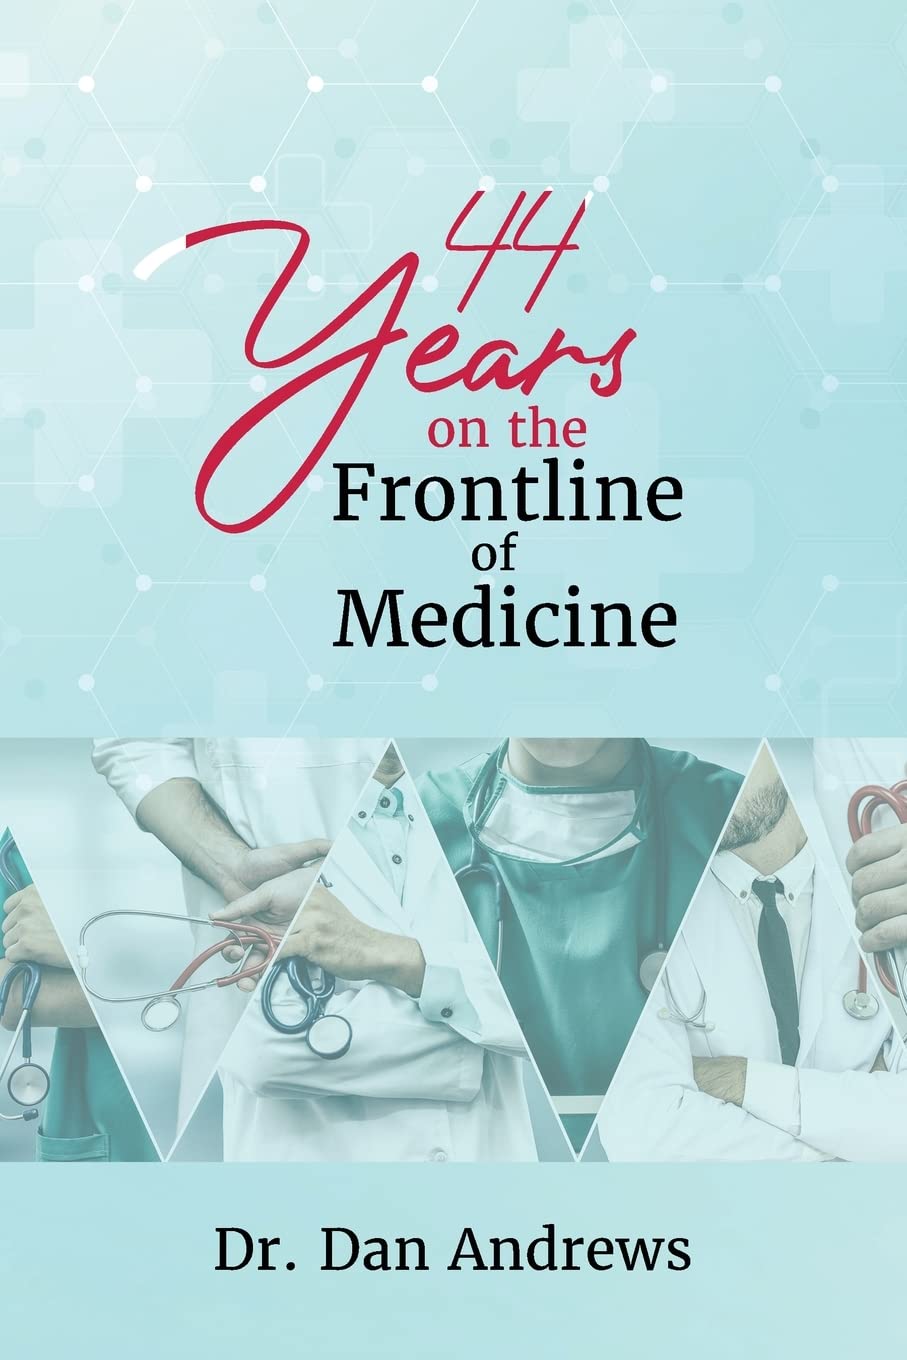 Dr. Dan Andrews’ 44 Years on the Frontline of Medicine Captivates Author's Tranquility Press